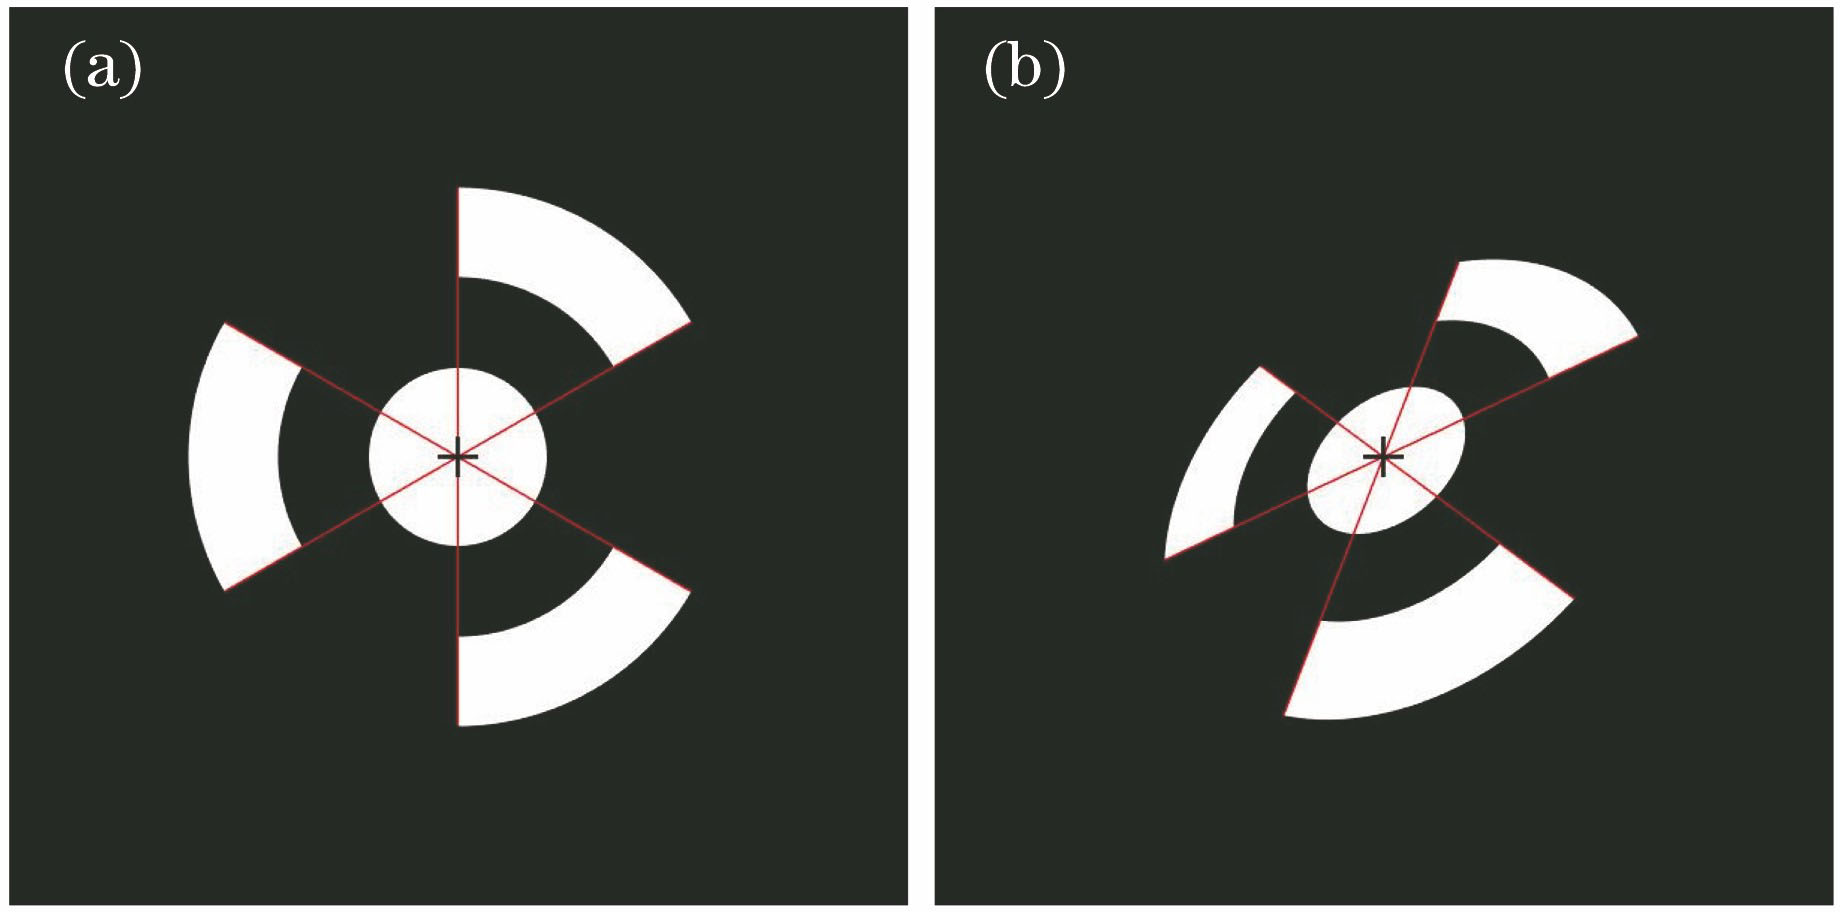 Schneider coding mark before and after projection transformation. (a) Marked point of object plane; (b) marked point of image plane